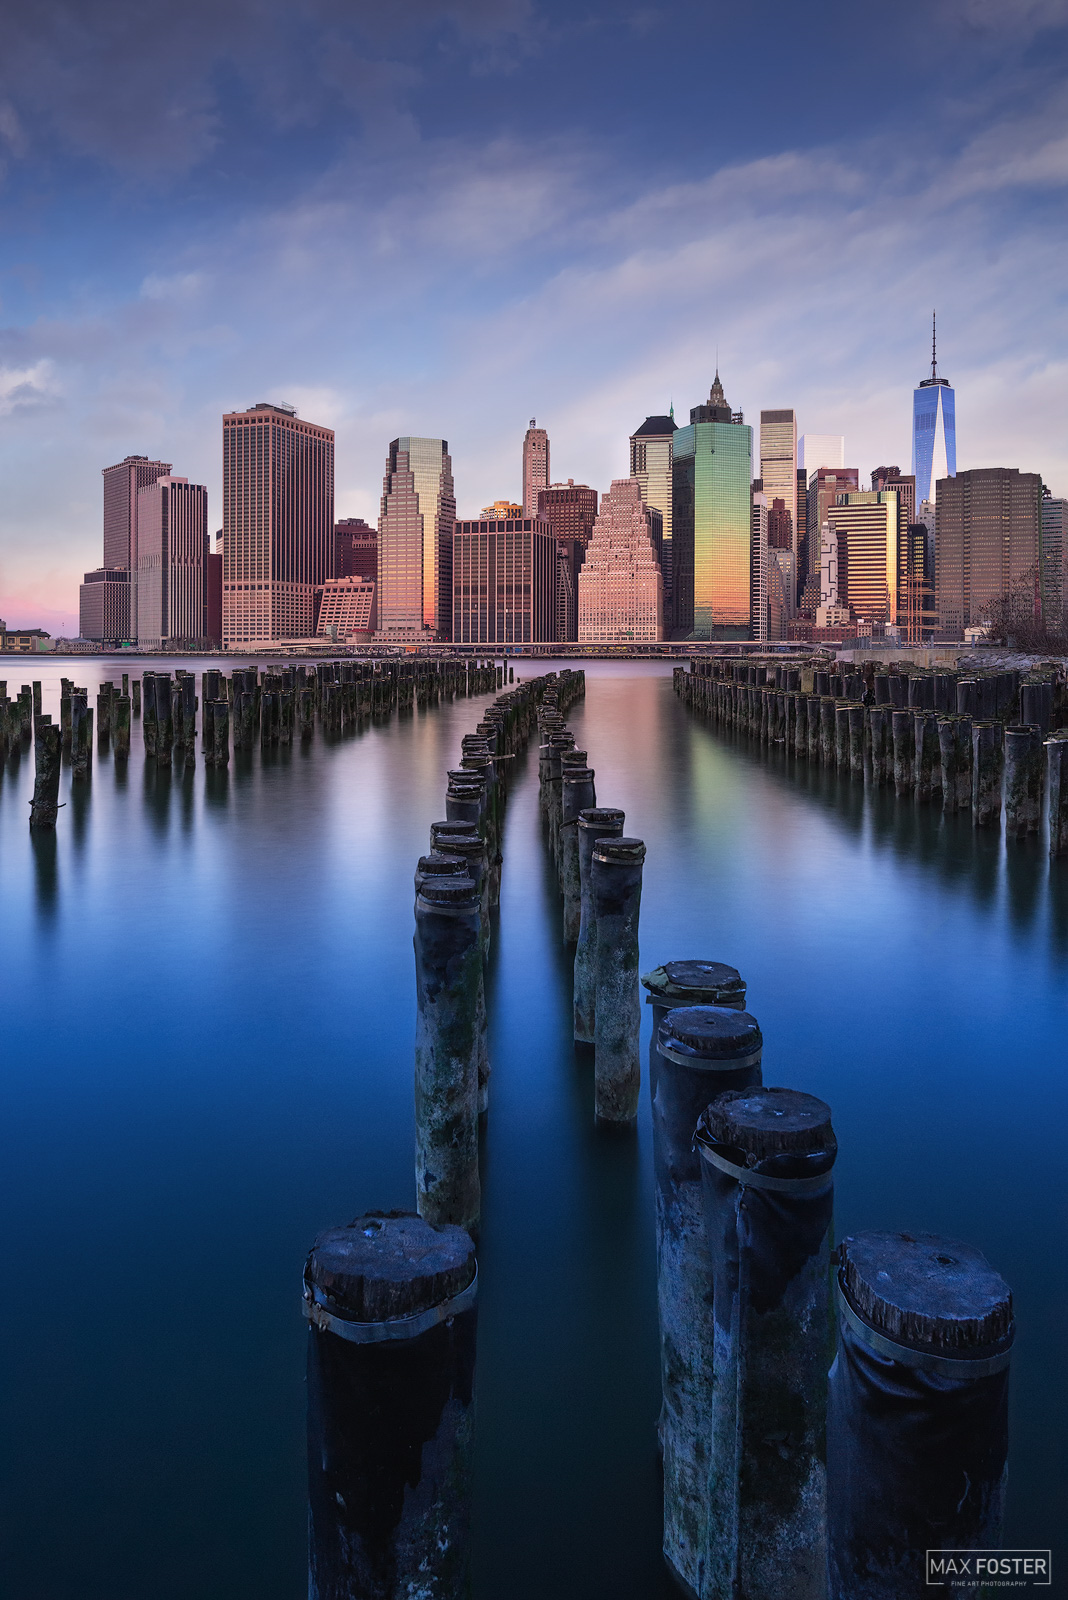 Refresh your space with Deep Still Blue, Max Foster's limited edition photography print of the New York City Skyline in New York...